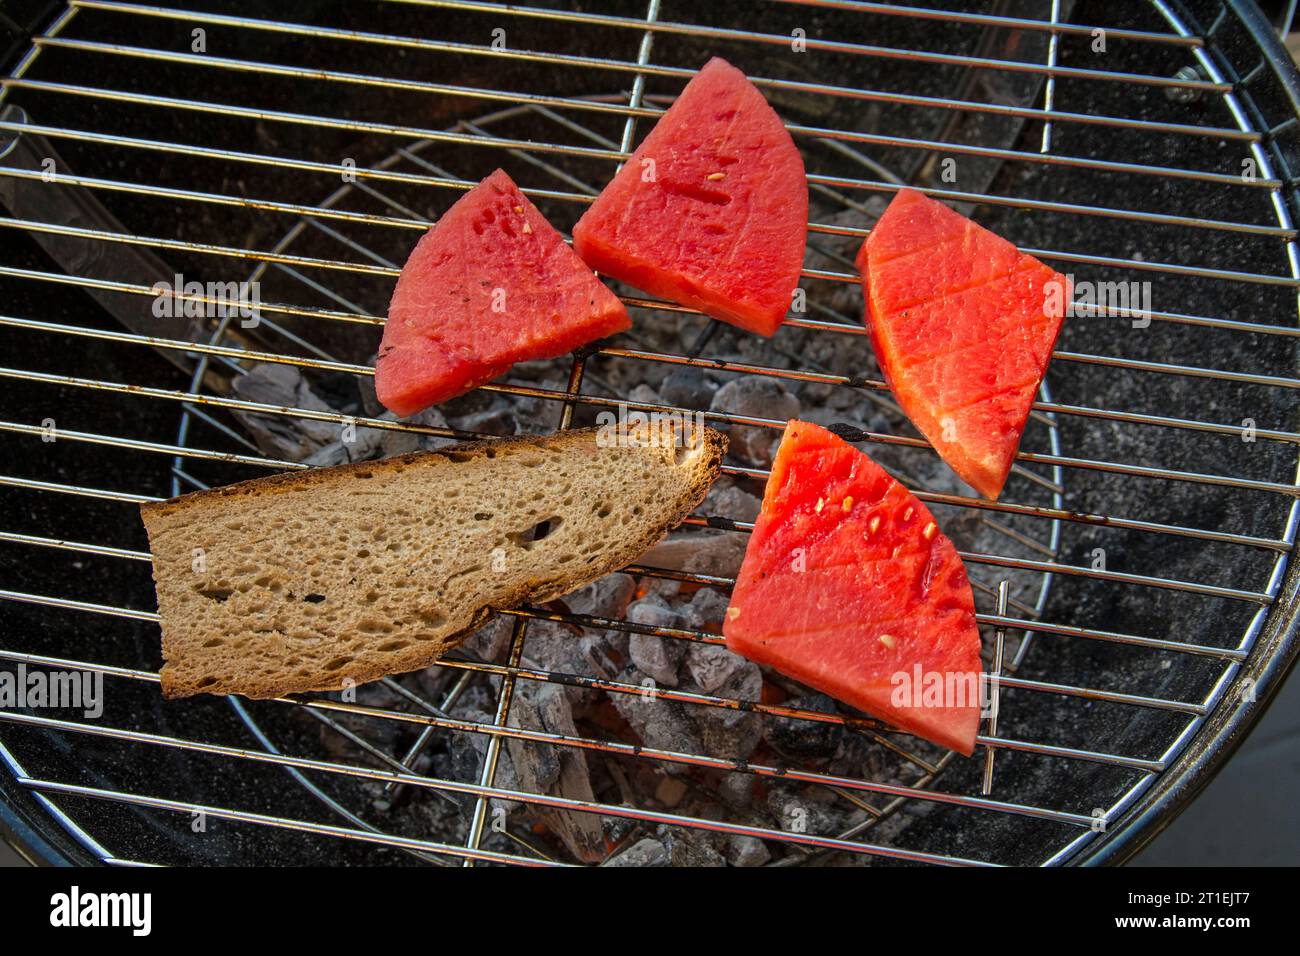 Bread and watermelon on the grill Stock Photo